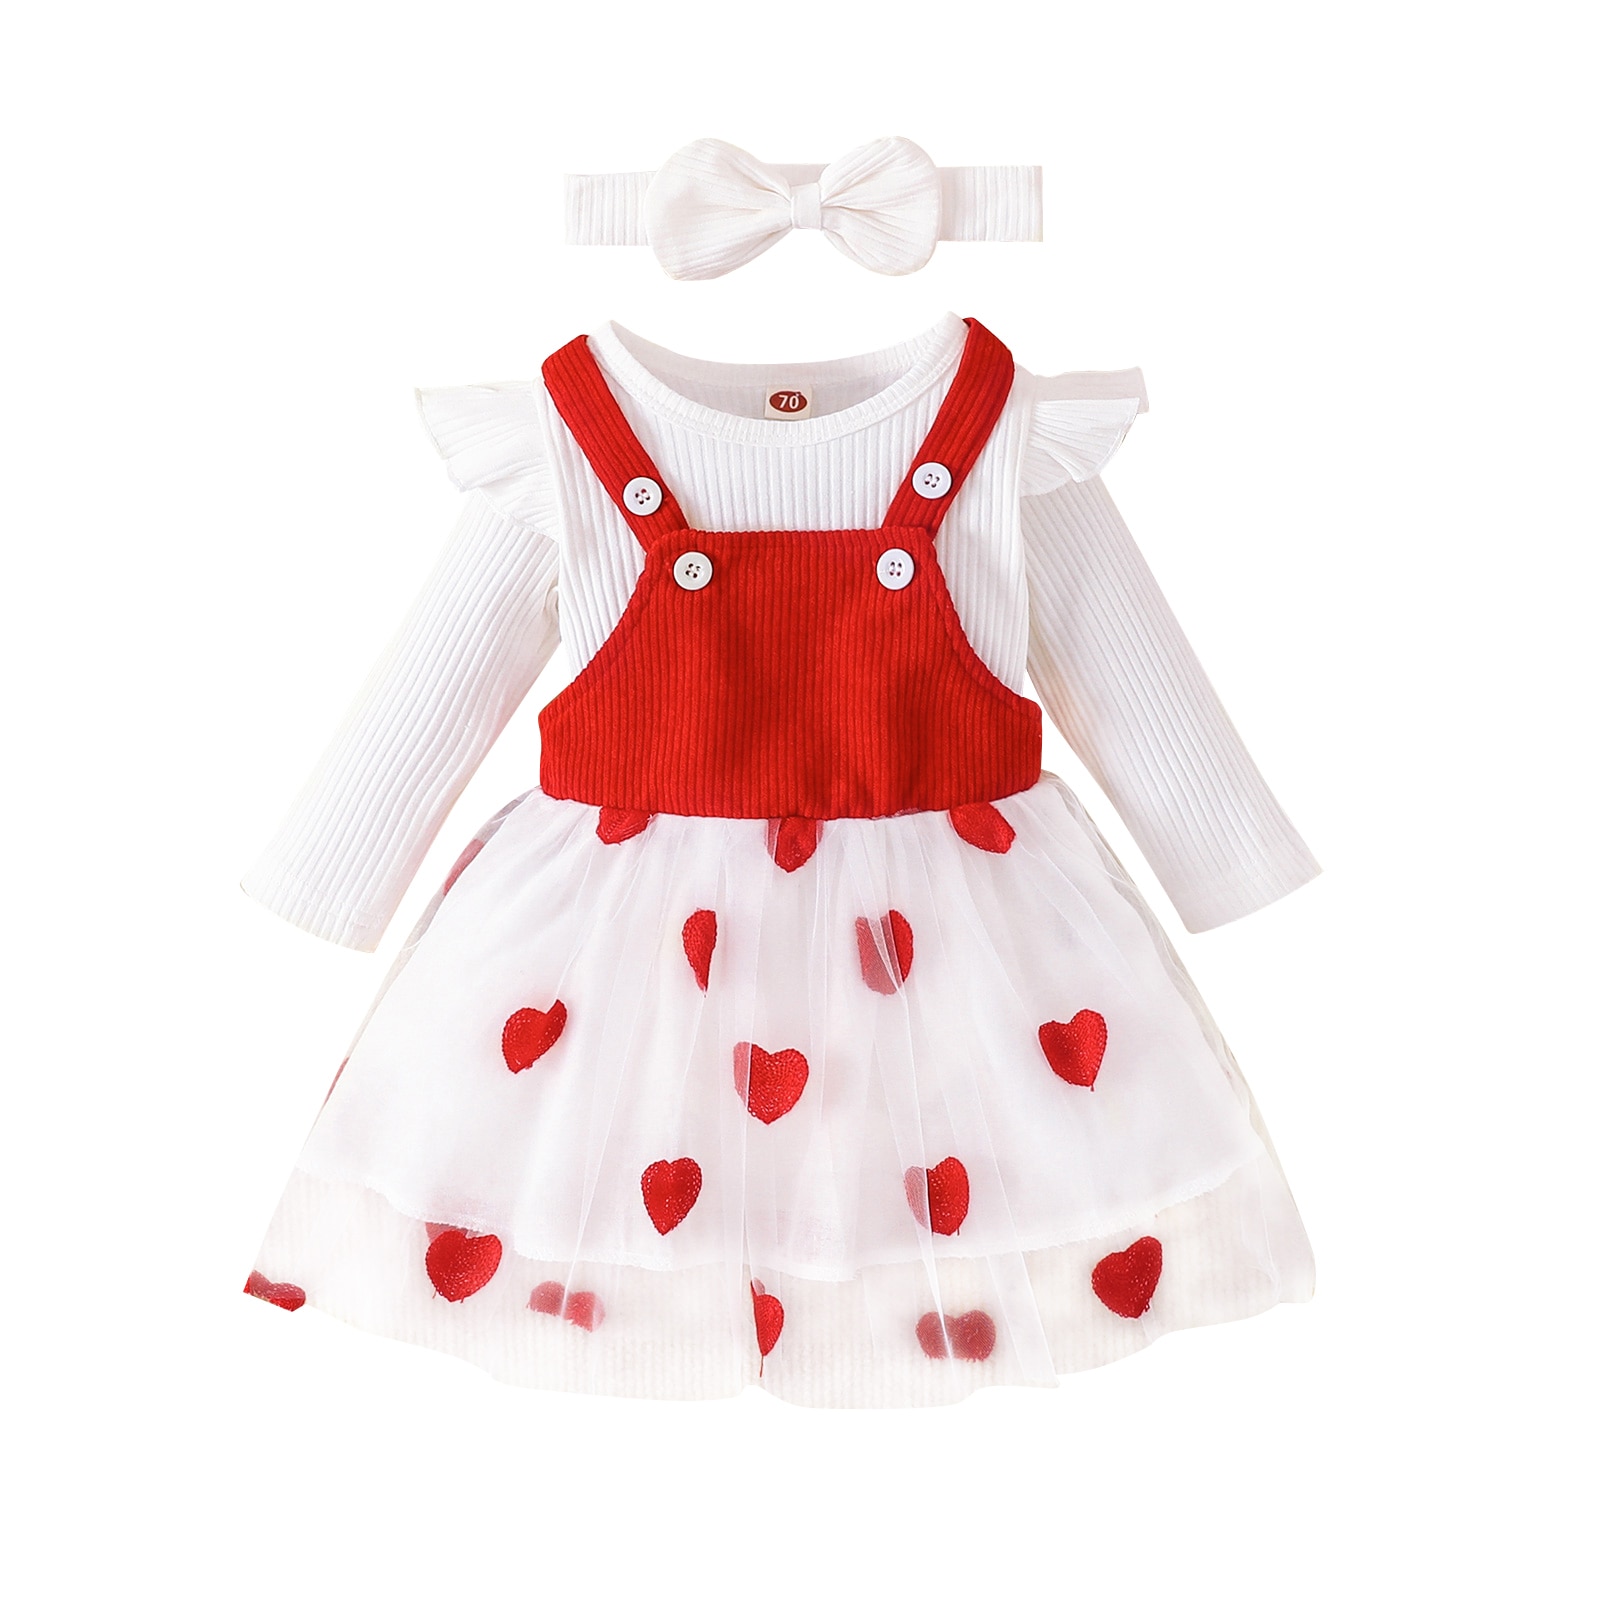 Citgeett-Spring-Valentine-s-Day-Infant-Baby-Girls-Jumpsuits-Set-Long-Sleeves-Romper-and-Heart-Print-5